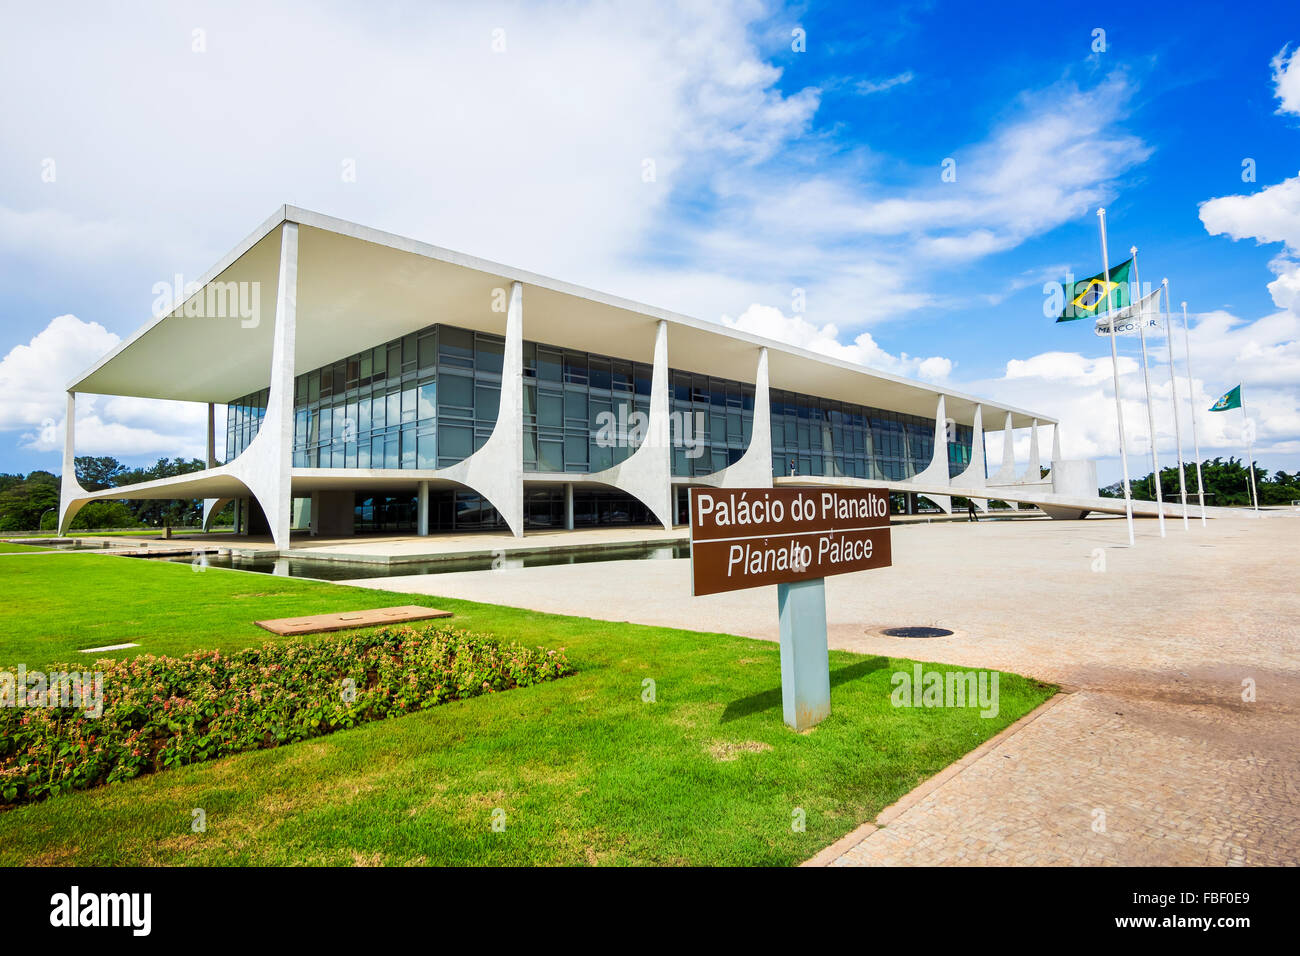 Palacio do Planalto (Planalto Palace), the official workplace of the President of Brazil, located in Brasilia, Brazil. Stock Photo